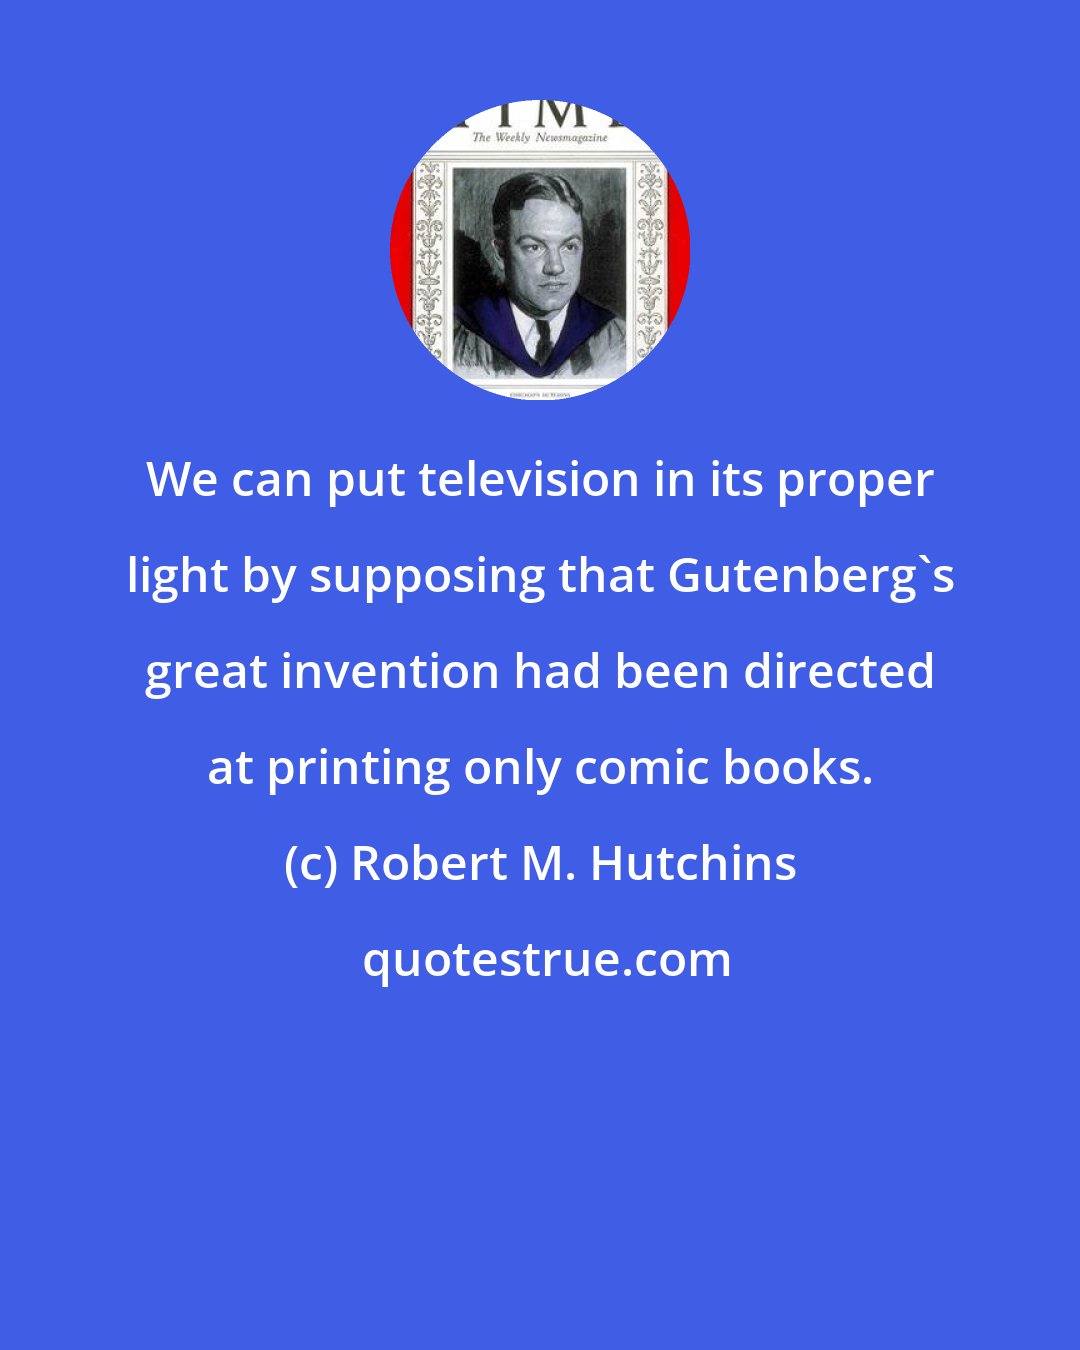 Robert M. Hutchins: We can put television in its proper light by supposing that Gutenberg's great invention had been directed at printing only comic books.